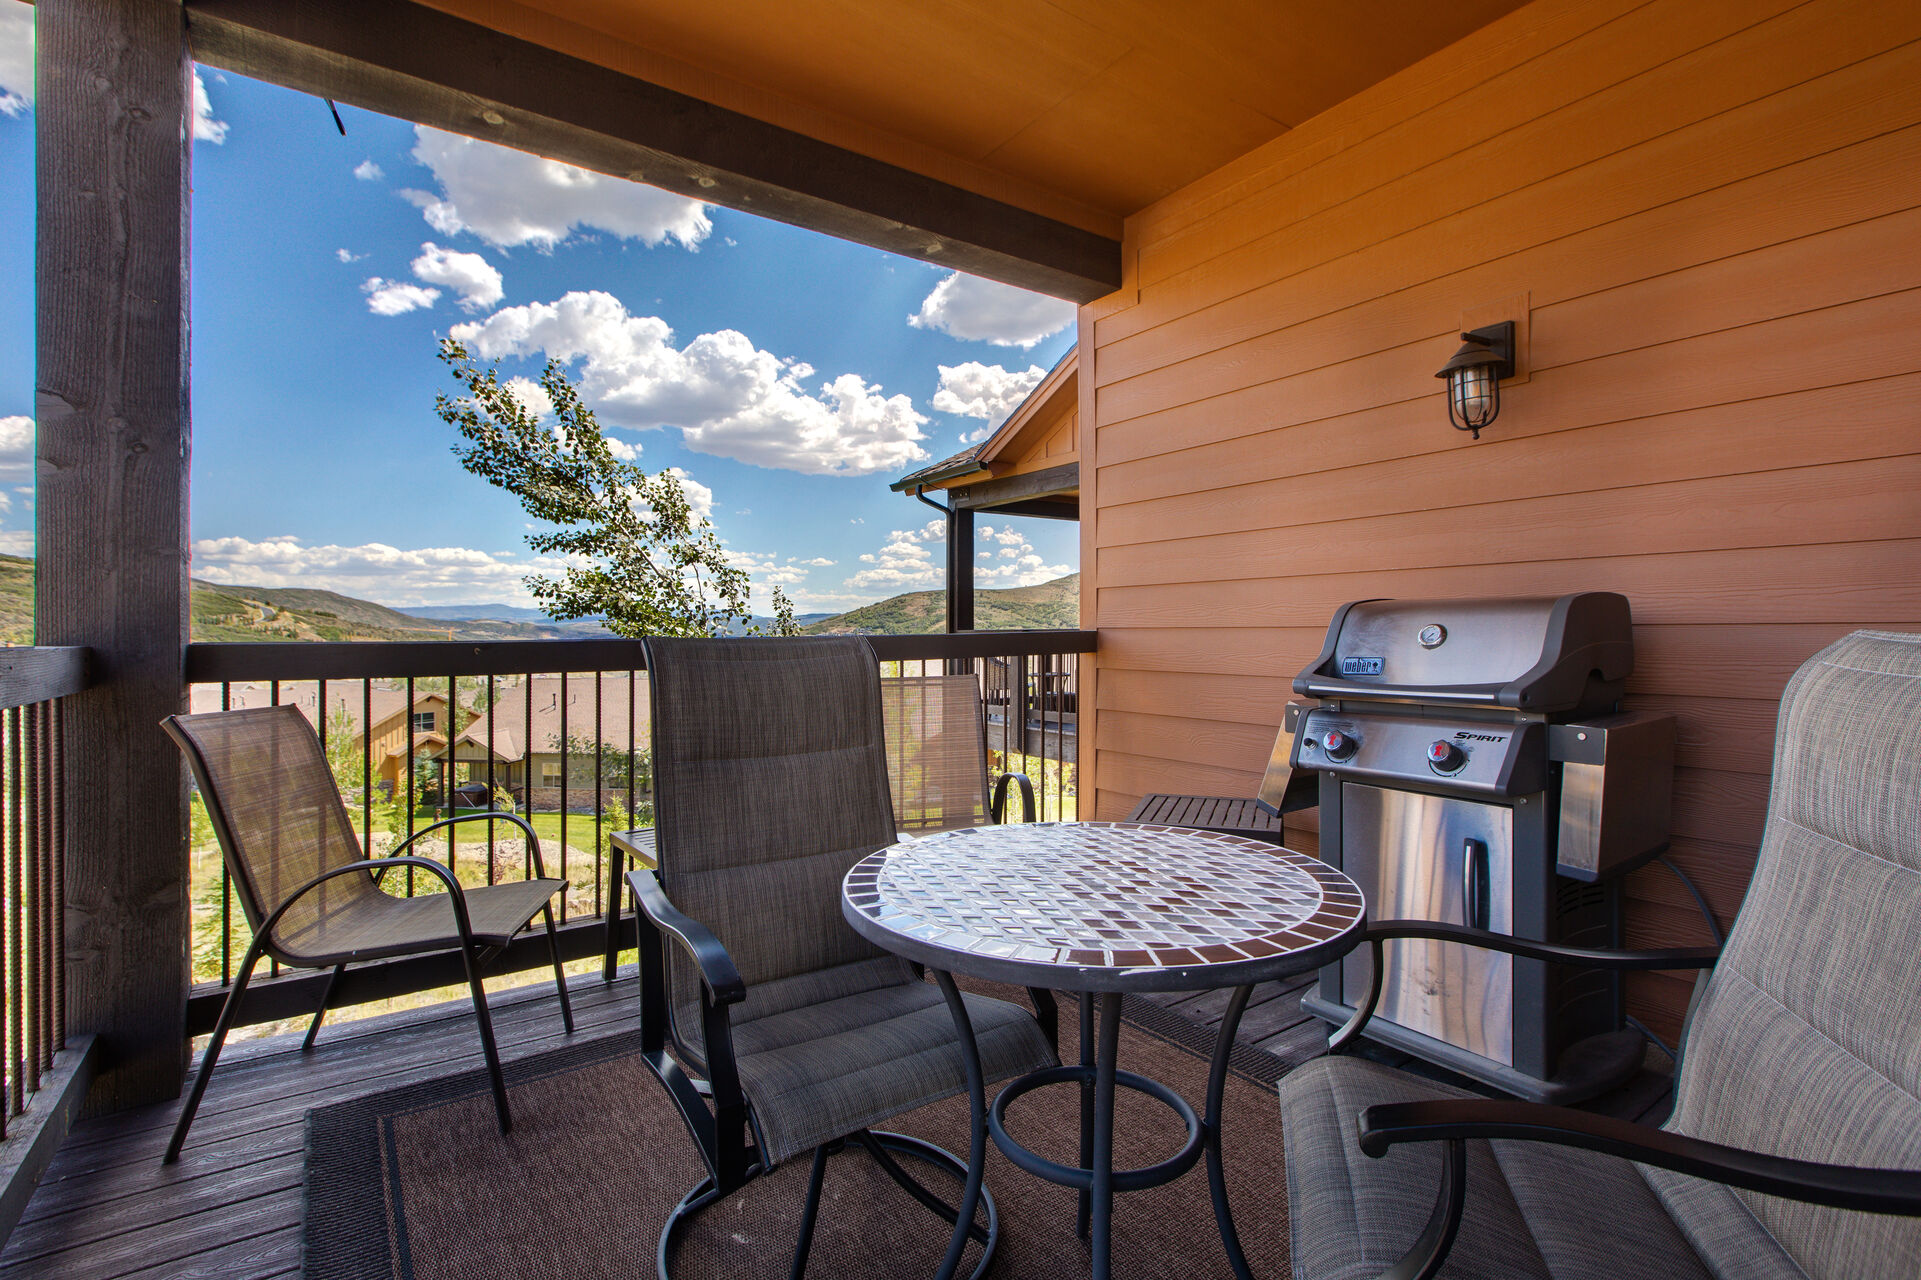 Covered Deck with Patio Seating and a Natural Gas BBQ